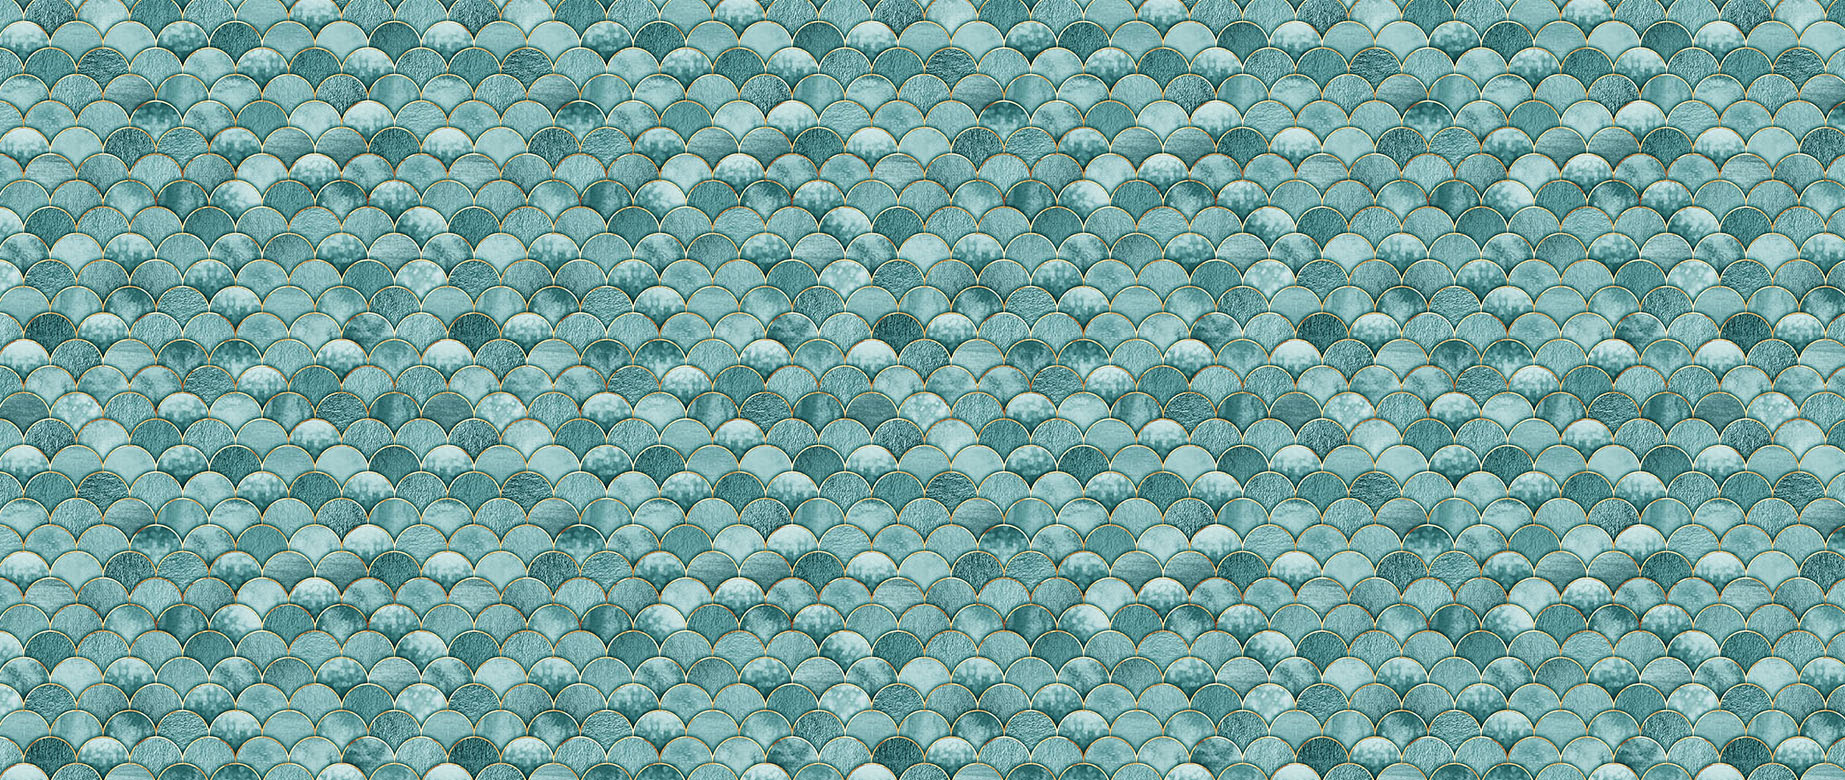 mermaid-scales-with-golden-edges-wallpaper-seamless-repeat-view